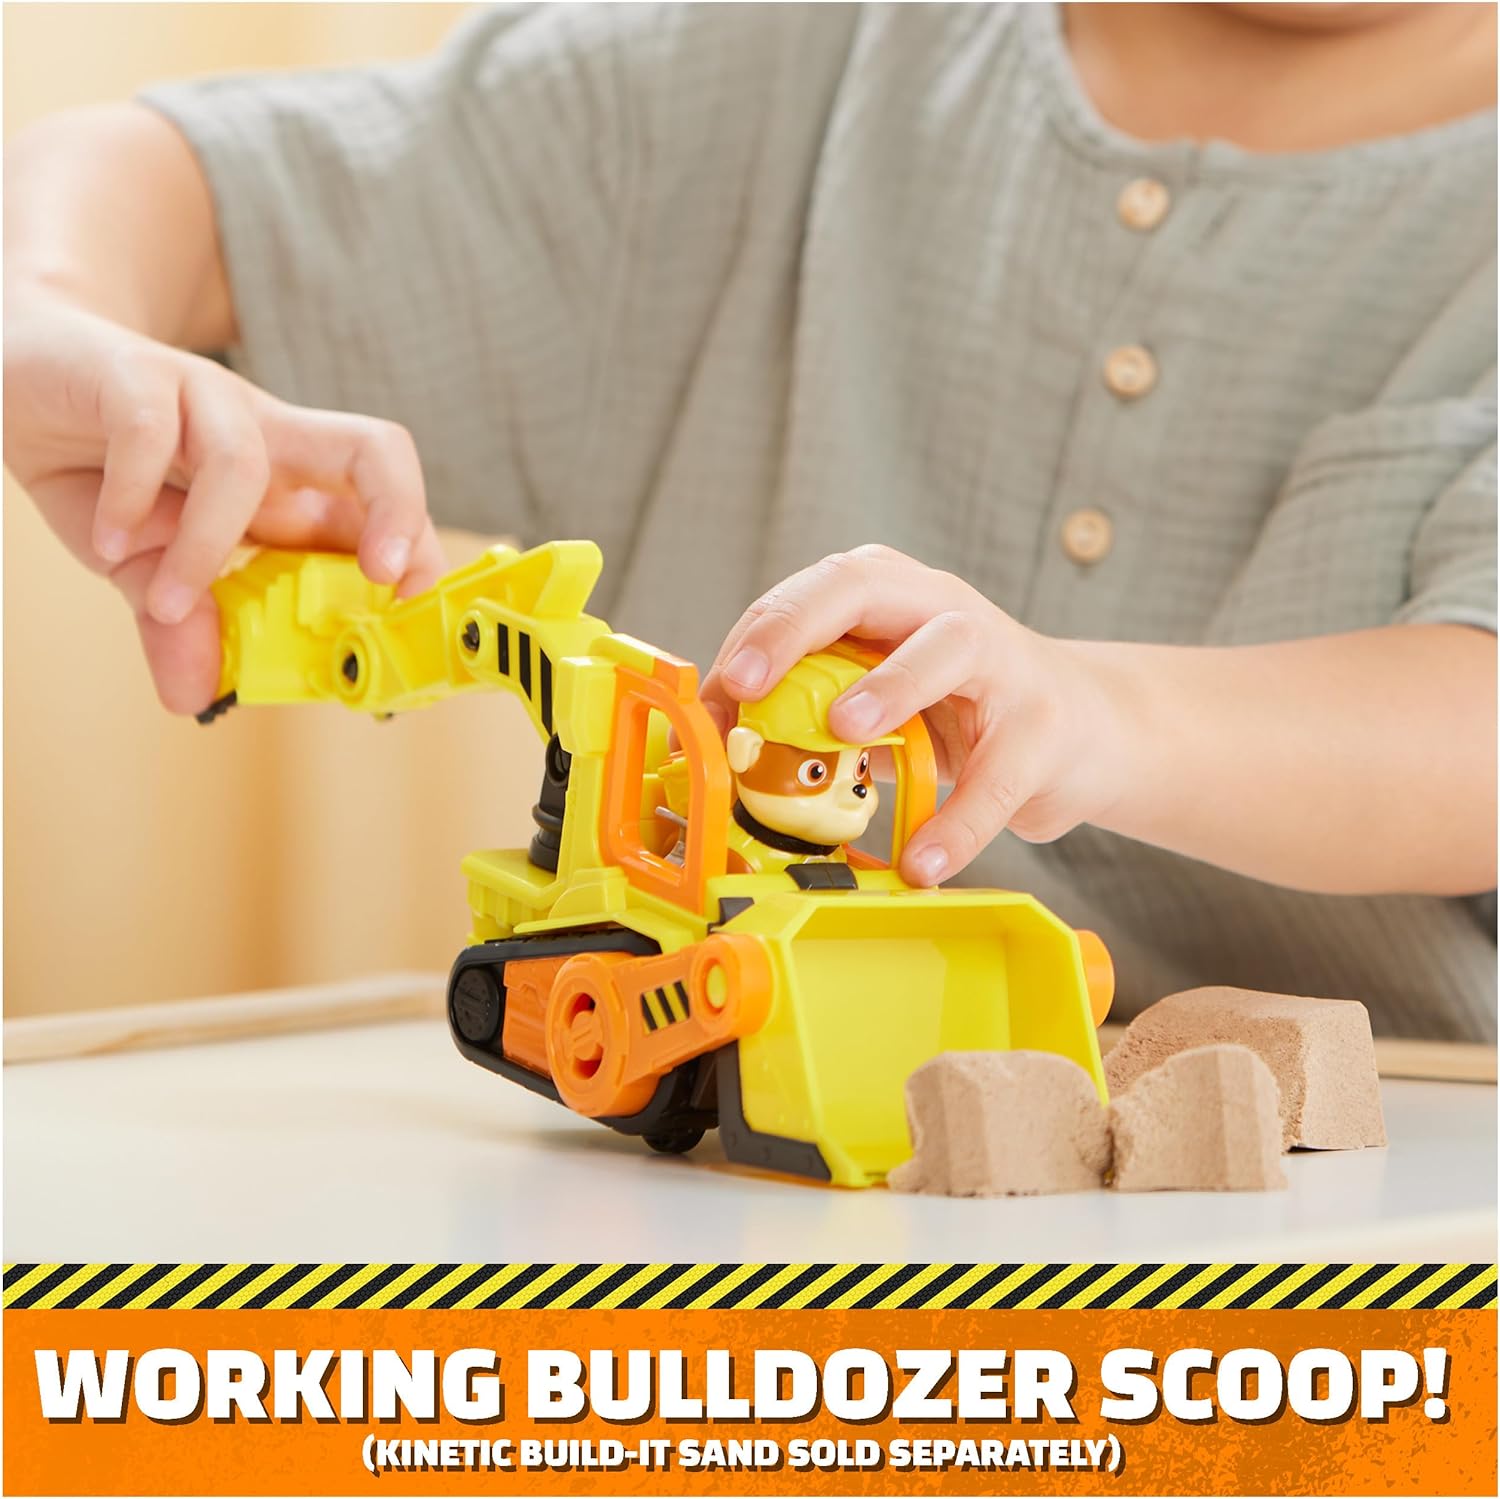 Rubble & Crew, Rubble’s Bulldozer Toy Truck with Movable Parts and a Collectible Action Figure, Kids Toys for Ages 3 and Up